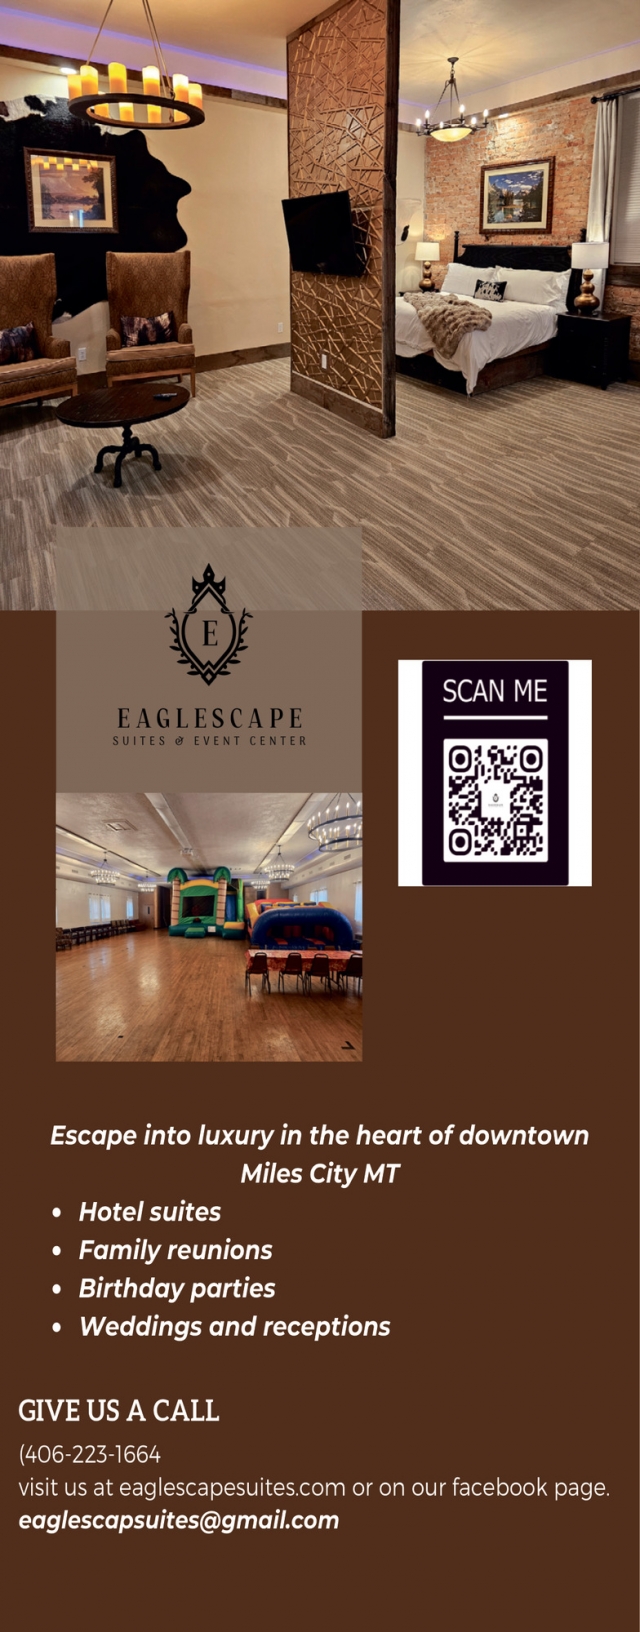 Escape Into Luxury in The Heart of Downtown Miles City MT, Eaglescape Suites & Event Center